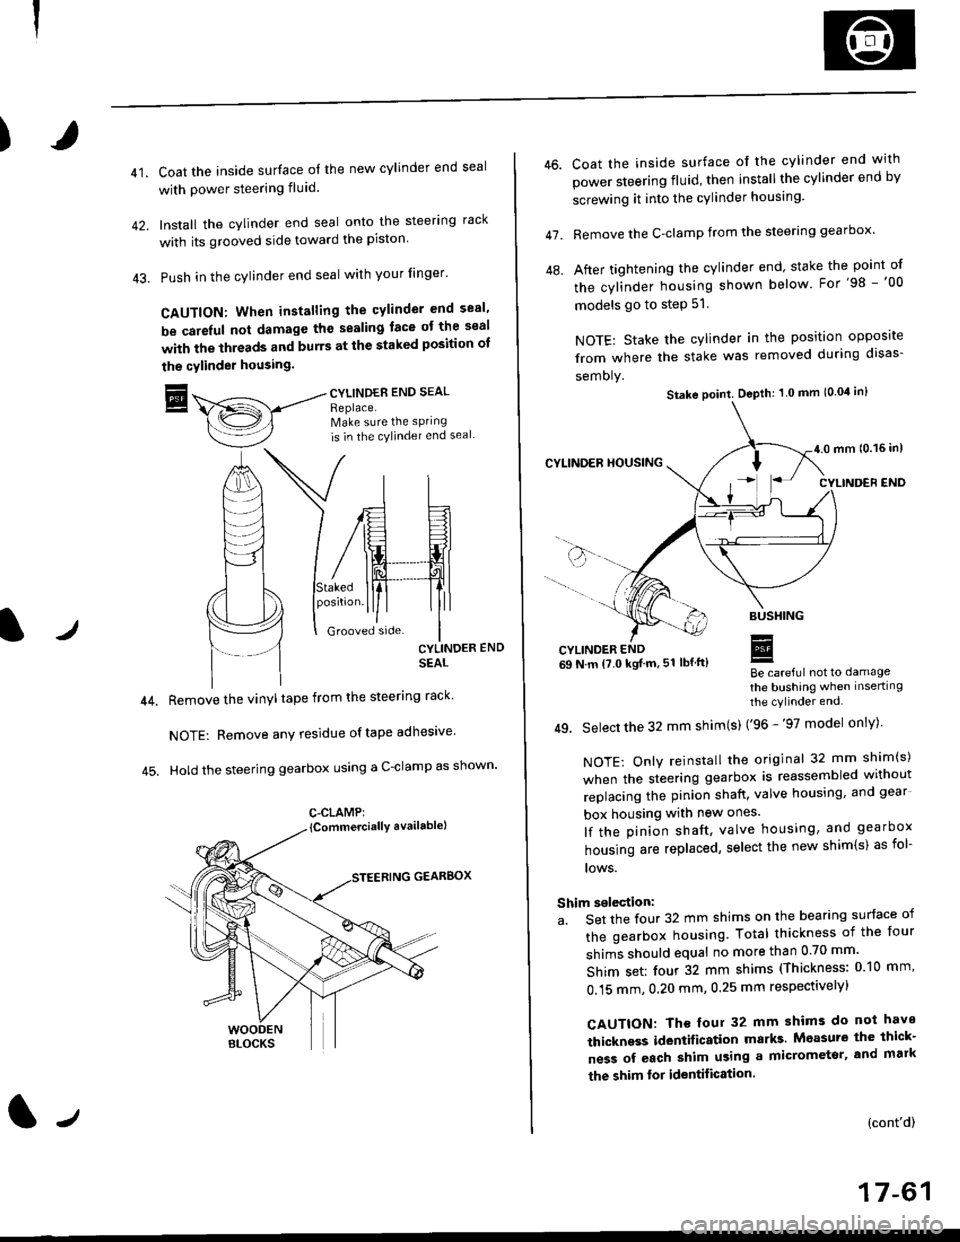 HONDA CIVIC 2000 6.G Workshop Manual )
41.Coat the inside surface of the new cylinder end seal
with power steering fluid.
Install the cylinder end seal onto the steering rack
with its grooved side toward the piston
Push in the cylinder 